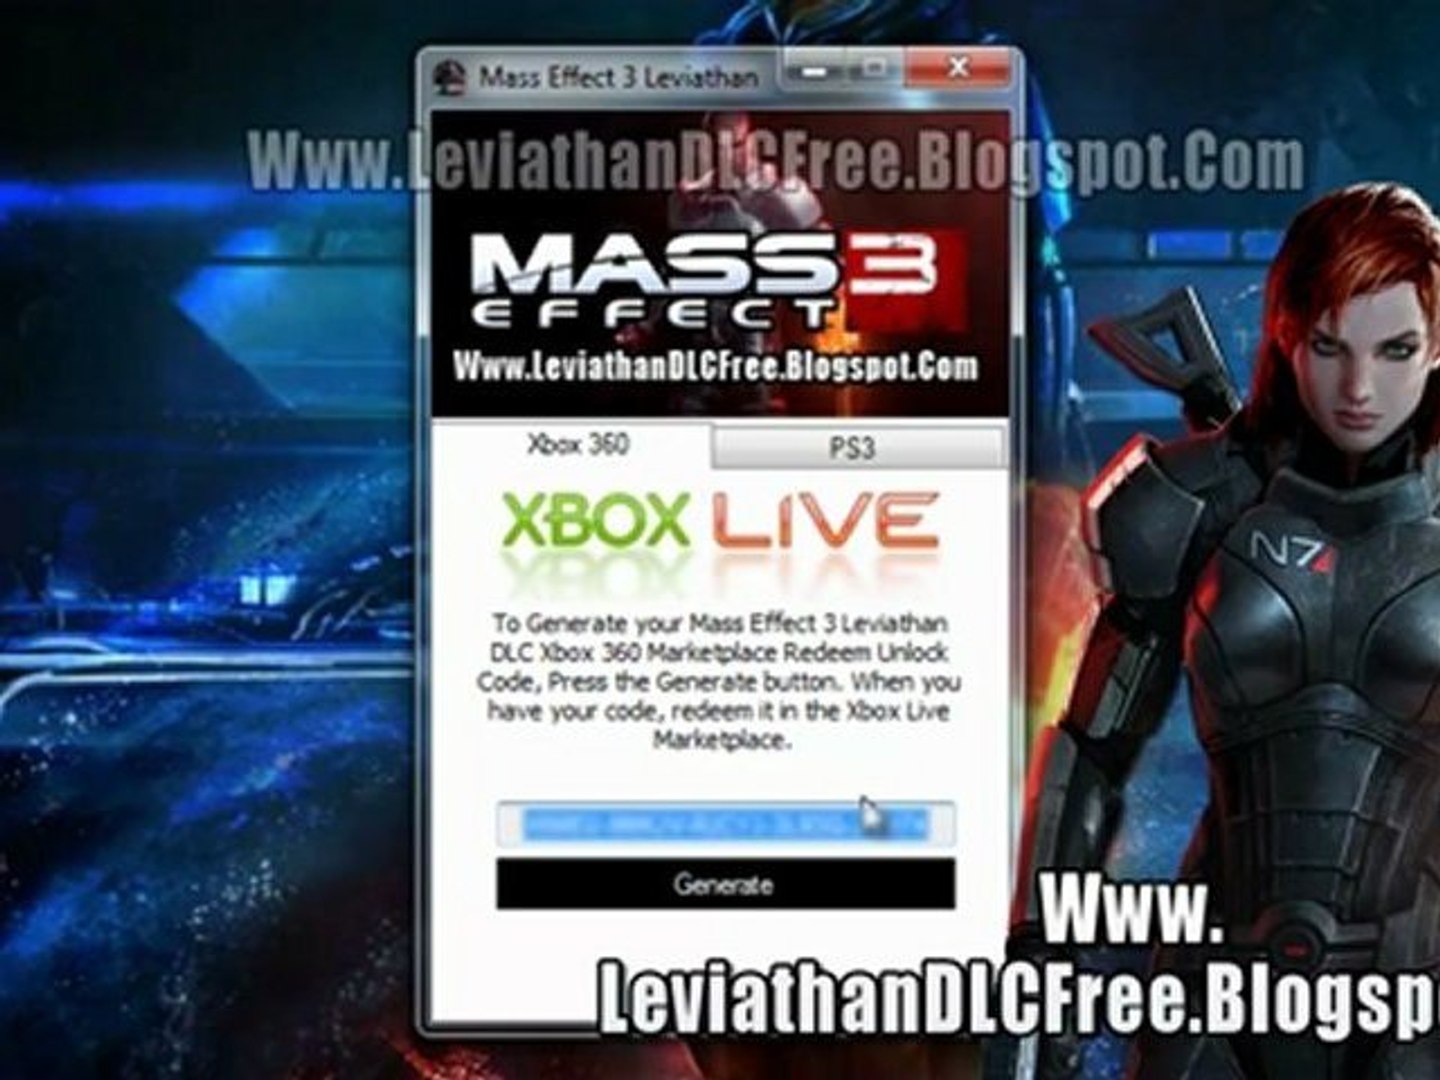 Mass Effect 3 Leviathan DLC Codes - Free - Xbox 360 - PS3 - video  Dailymotion